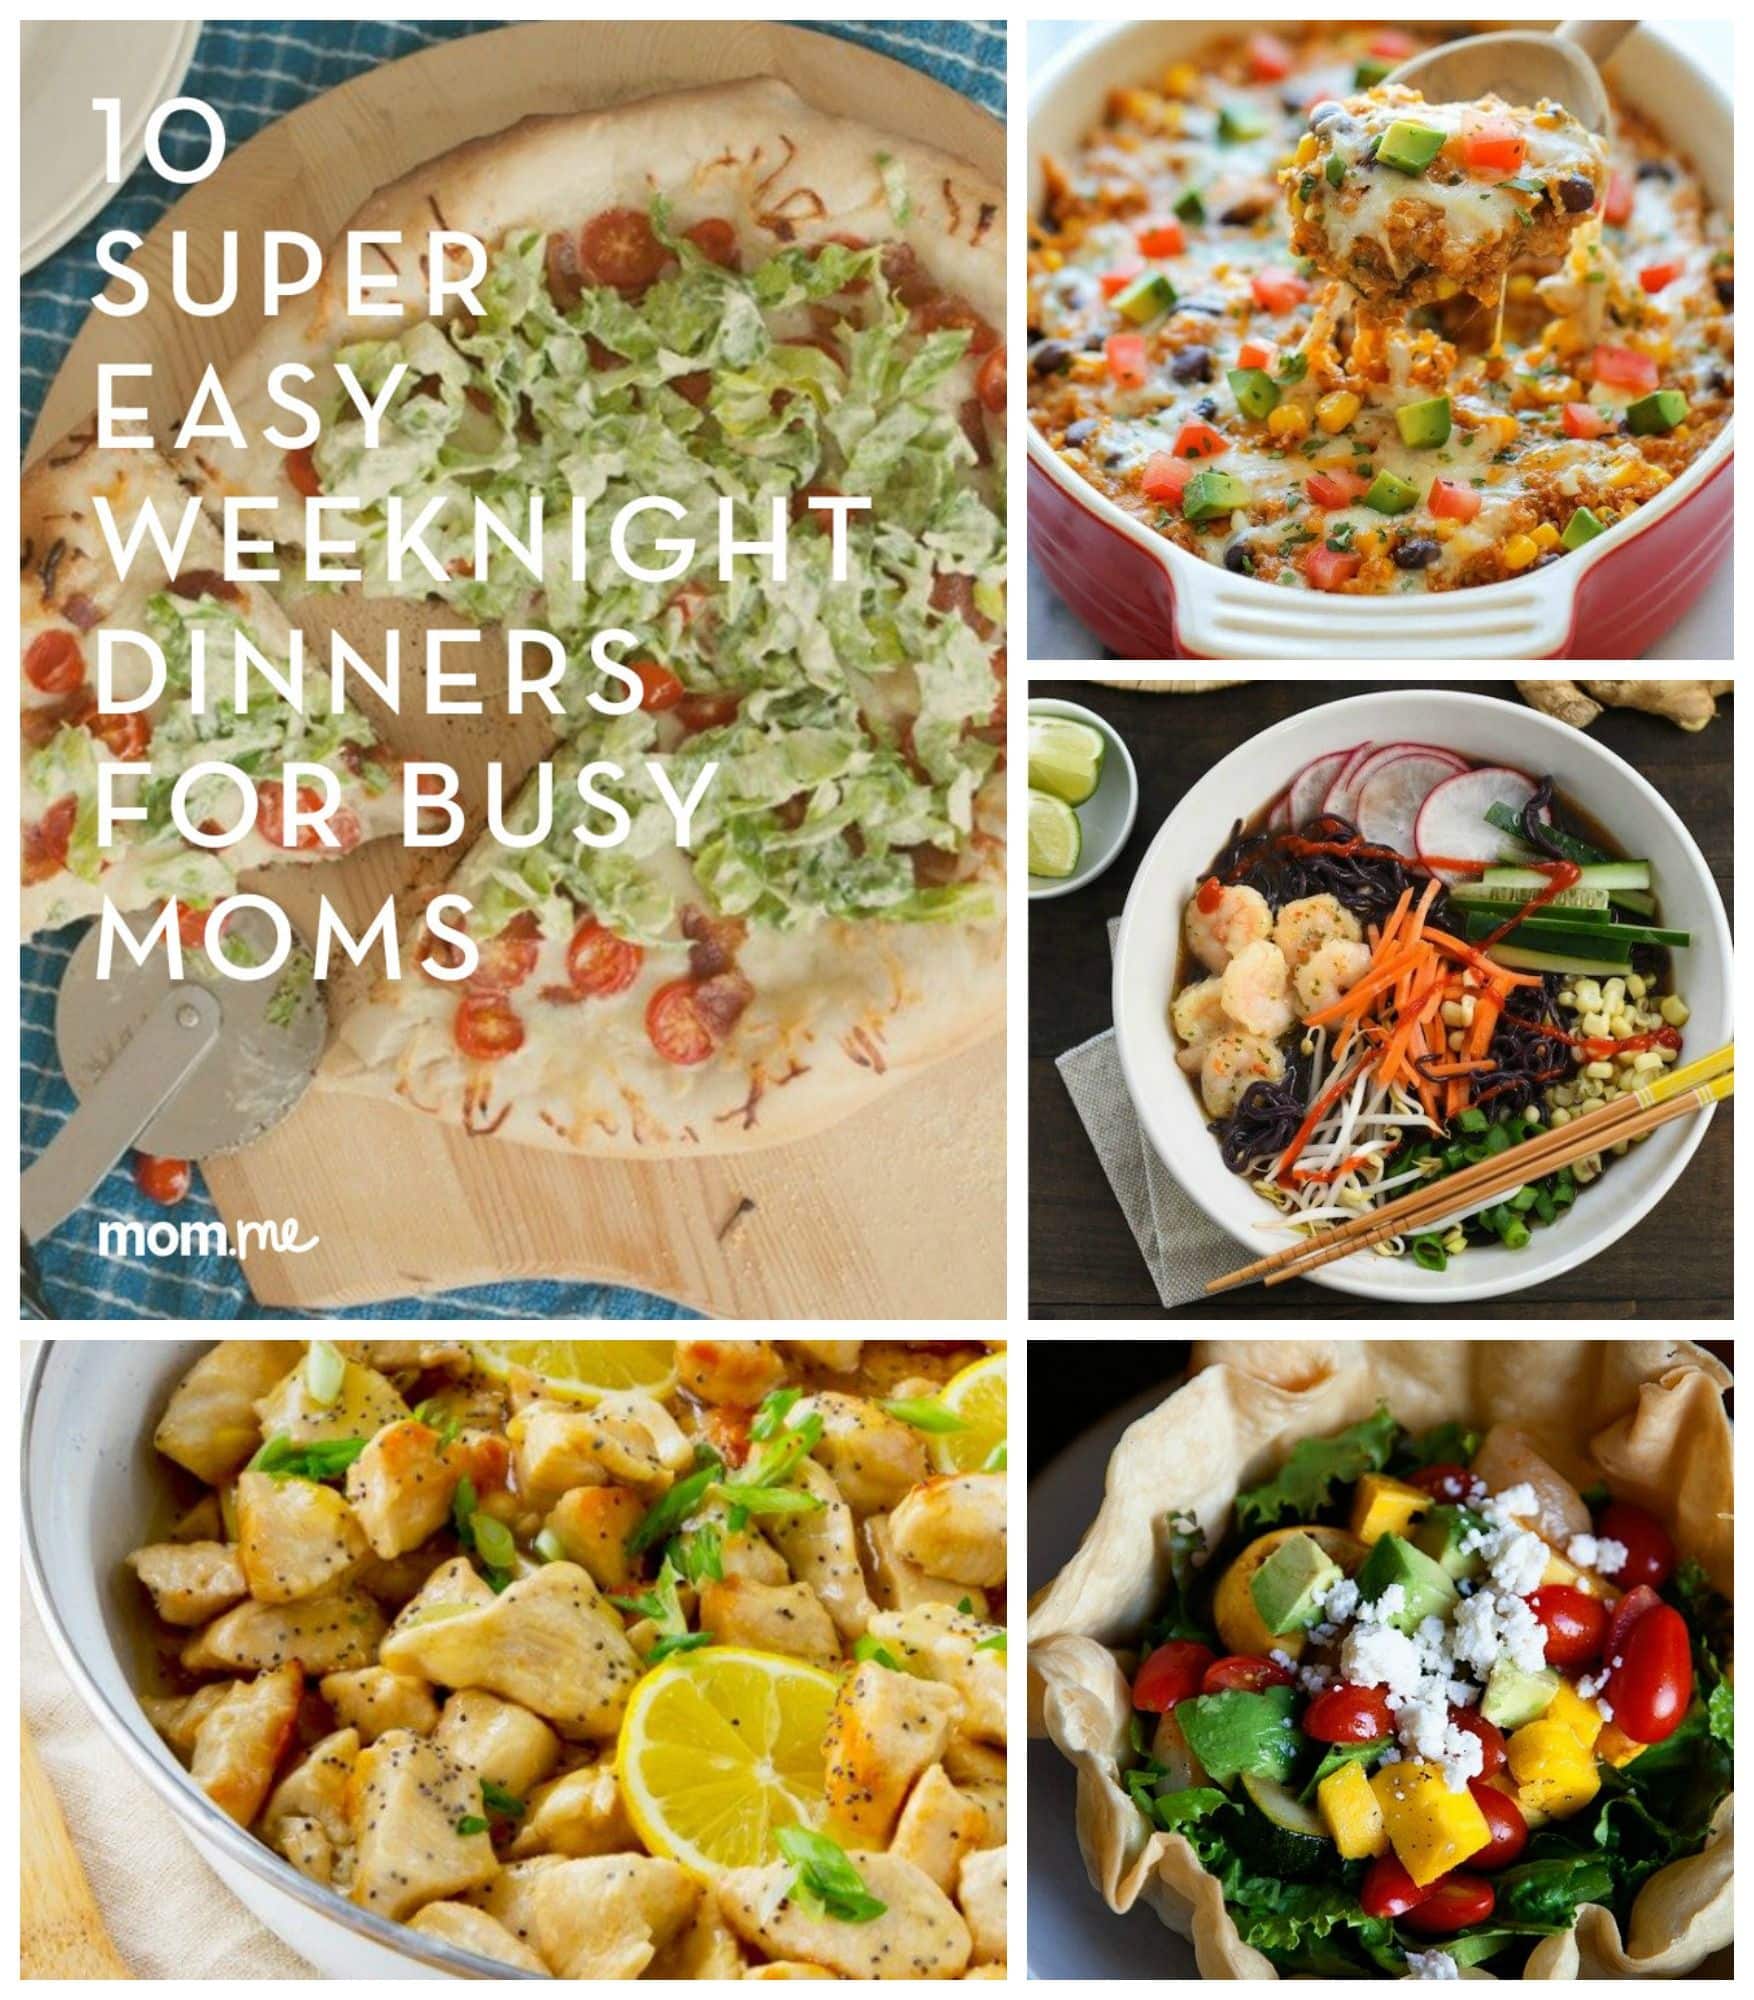 Super Easy Weeknight Dinners for Busy Moms